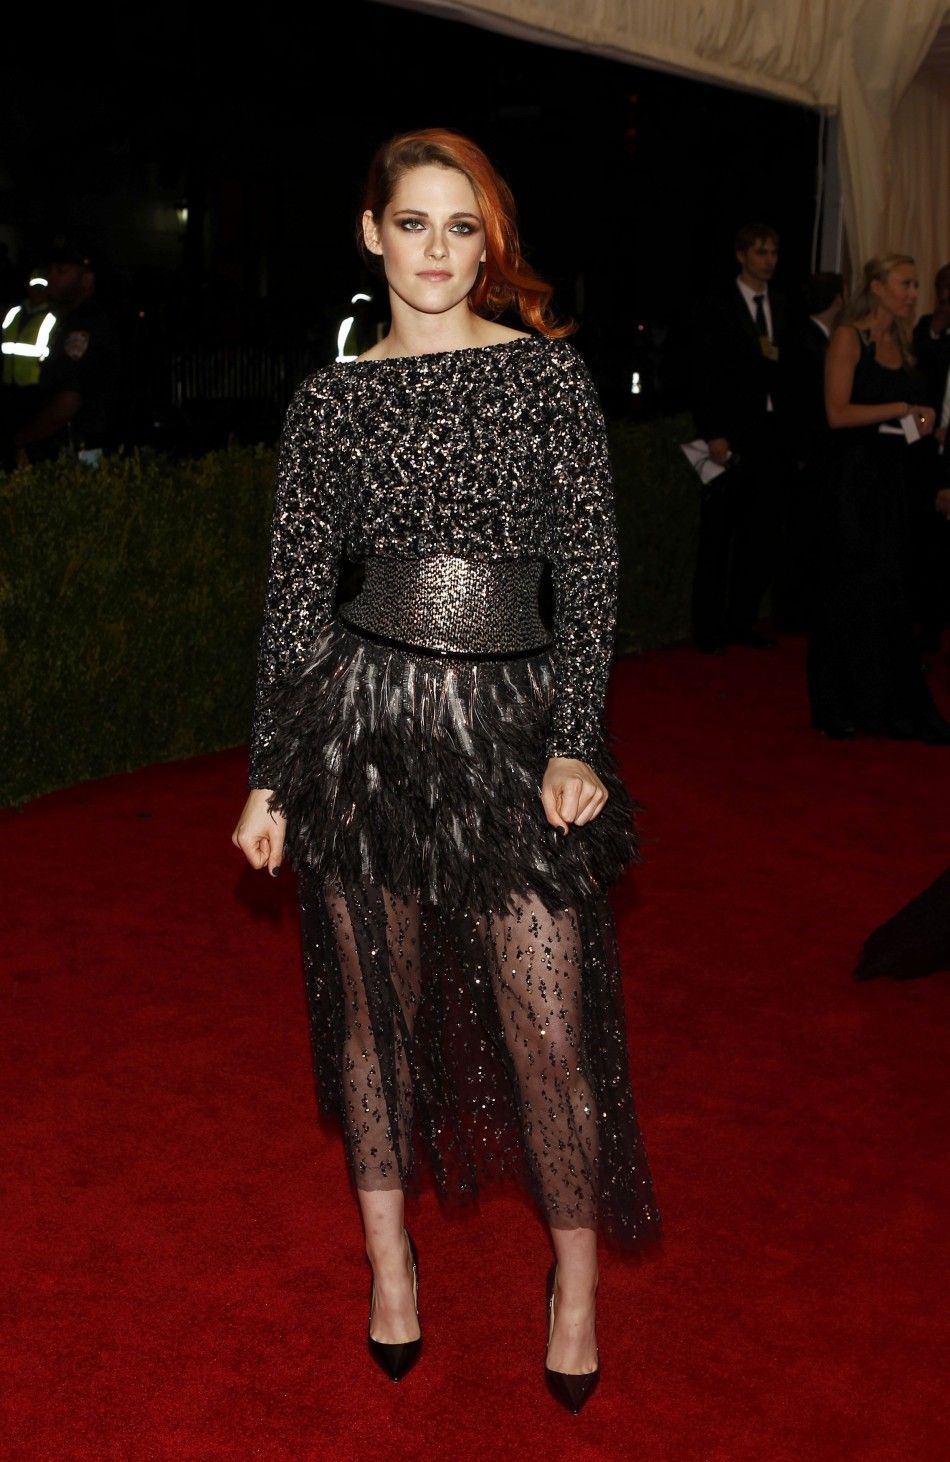 Actress Kristen Stewart arrives at the Metropolitan Museum of Art Costume Institute Gala Benefit celebrating the opening of quotCharles James Beyond Fashionquot in Upper Manhattan, New York May 5, 2014. REUTERSCarlo Allegri   